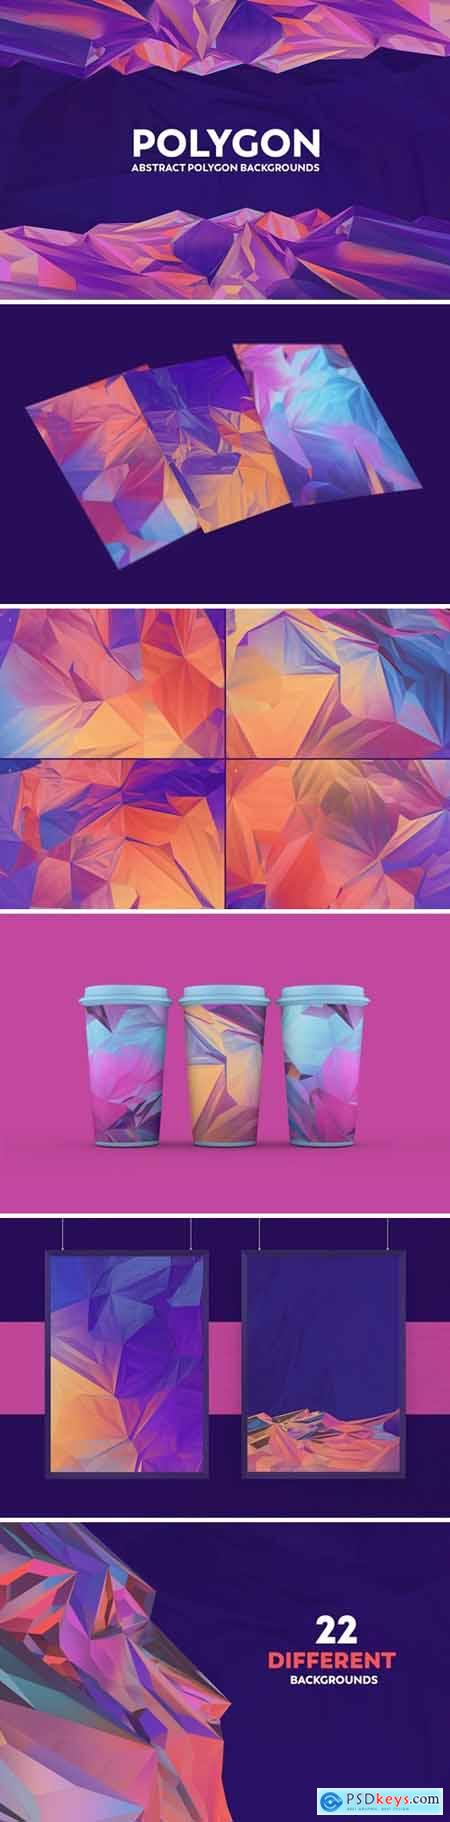 Abstract Polygon Backgrounds - Colorful Colors